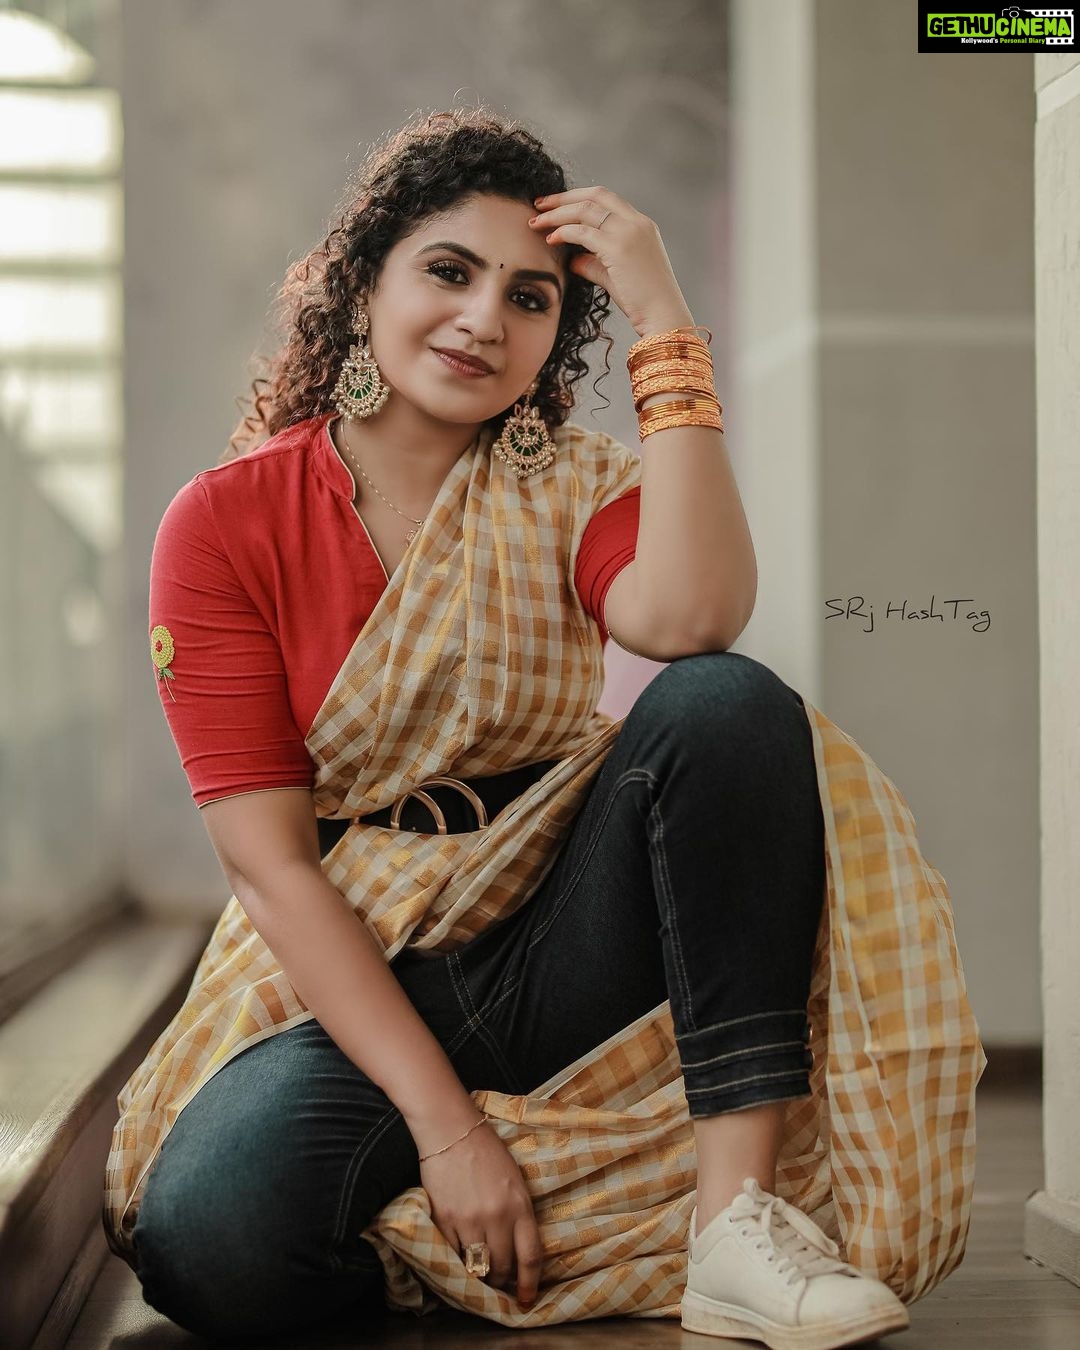 Noorin Shereef Nude Picture - Actress Noorin Shereef HD Photos and Wallpapers August 2020 - Gethu Cinema